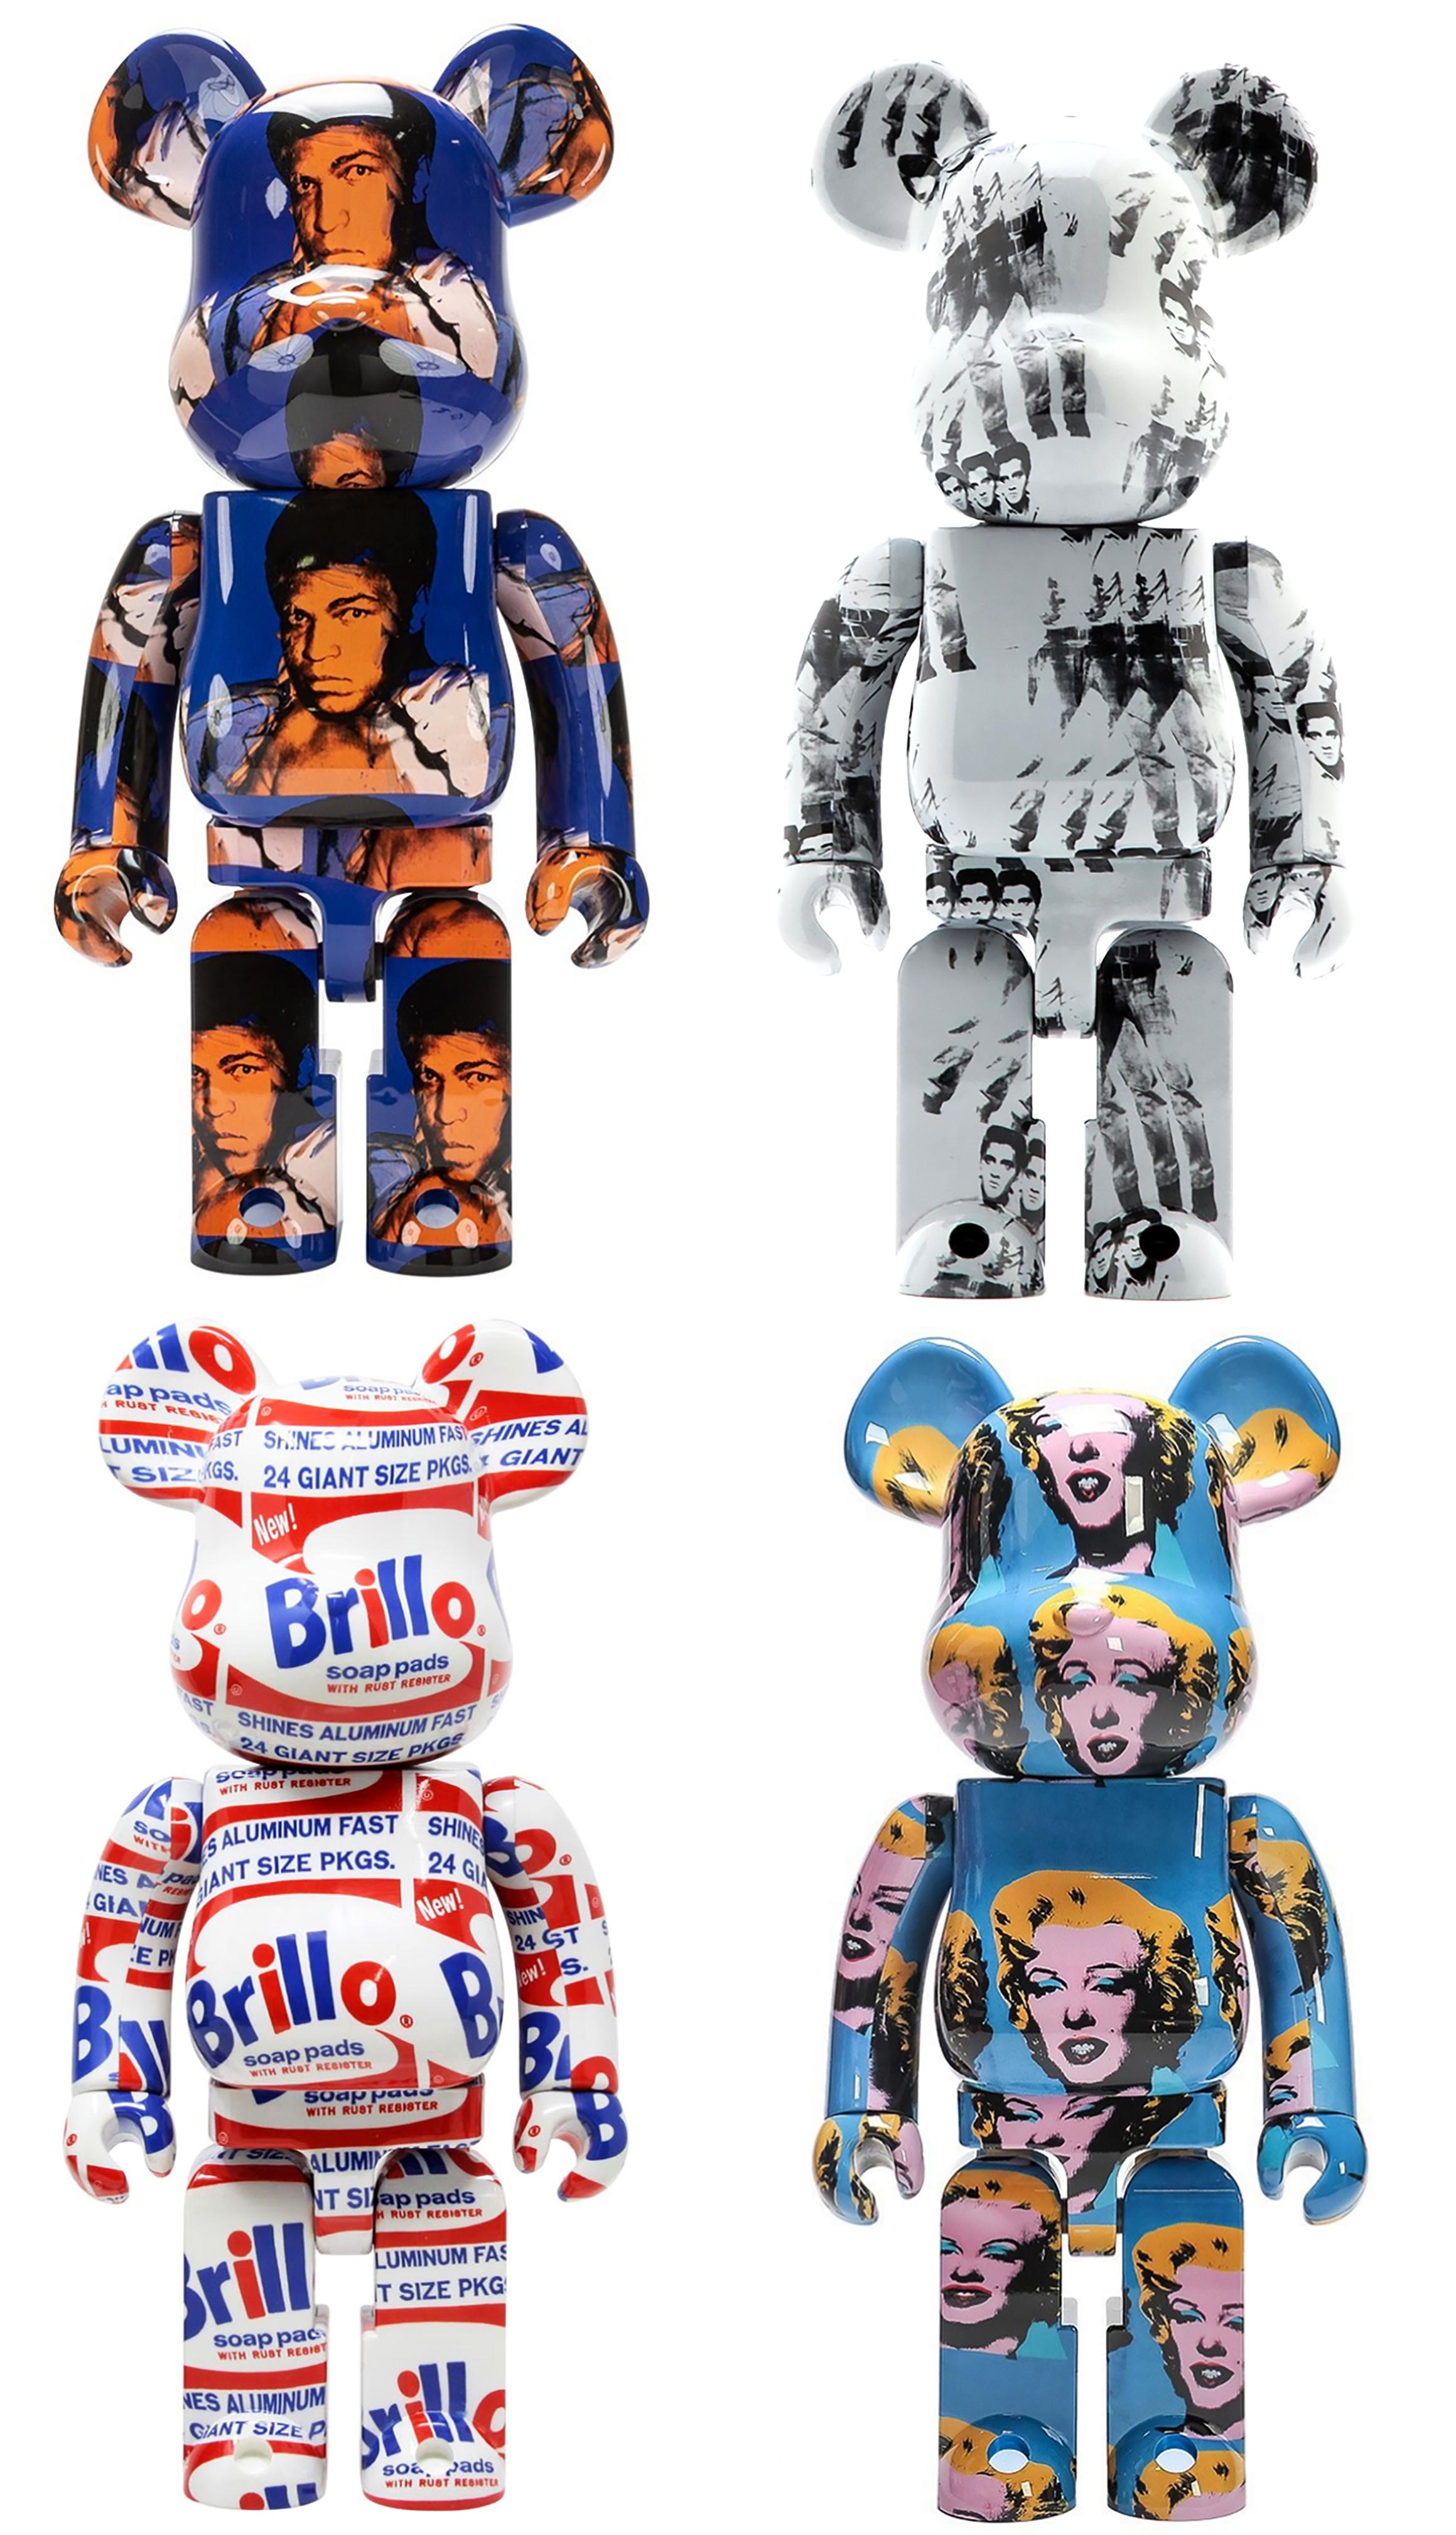 (after) Andy Warhol Figurative Sculpture - Andy Warhol Bearbrick 400% set of 4 works (Warhol BE@RBRICK)